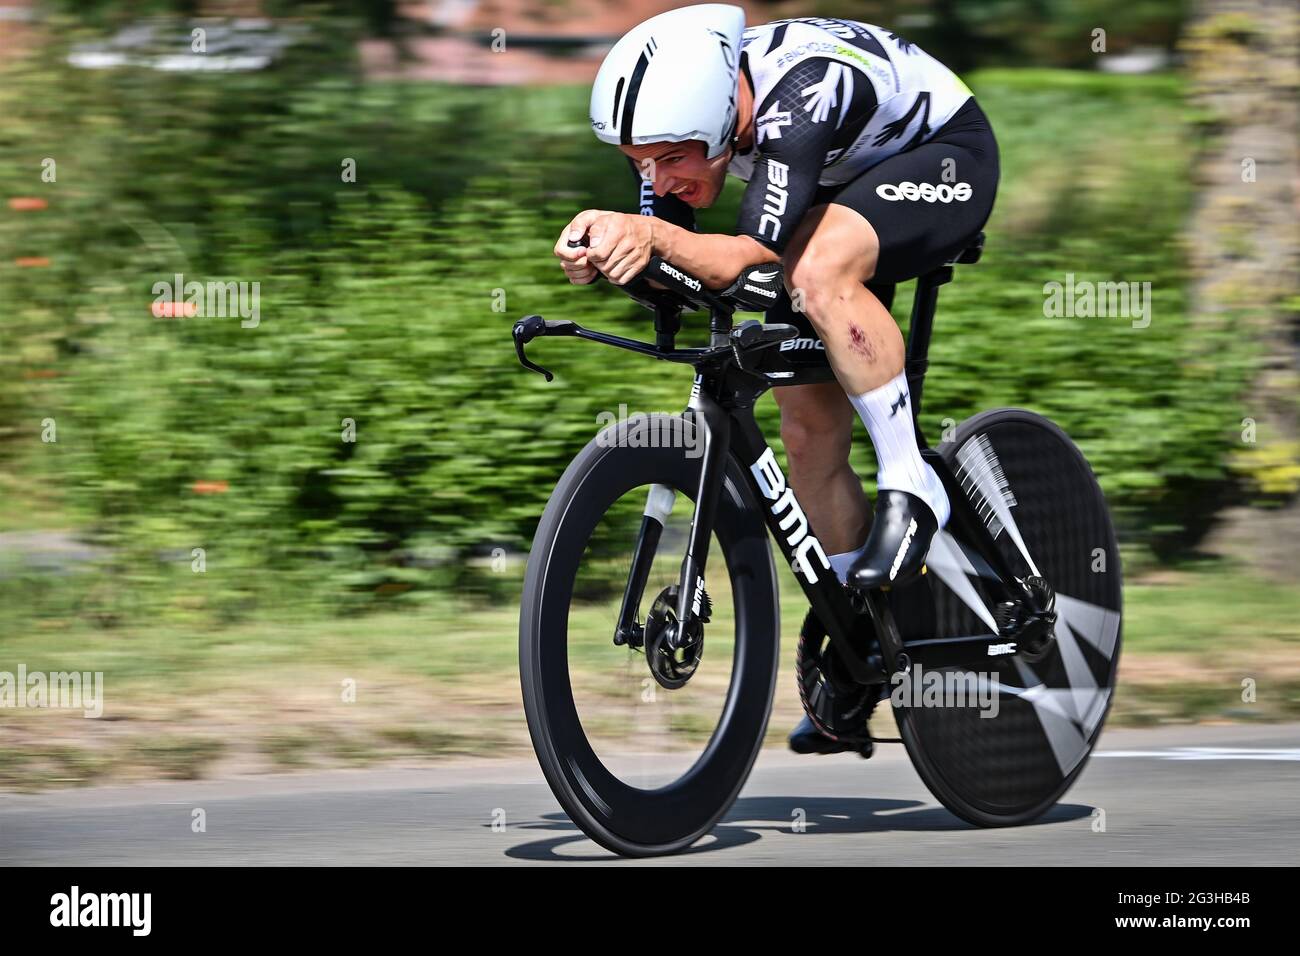 Belgian Victor Campenaerts of Qhubeka Assos pictured in action during the men's elite individual time trial race of 37,6 km at the Belgian championshi Stock Photo